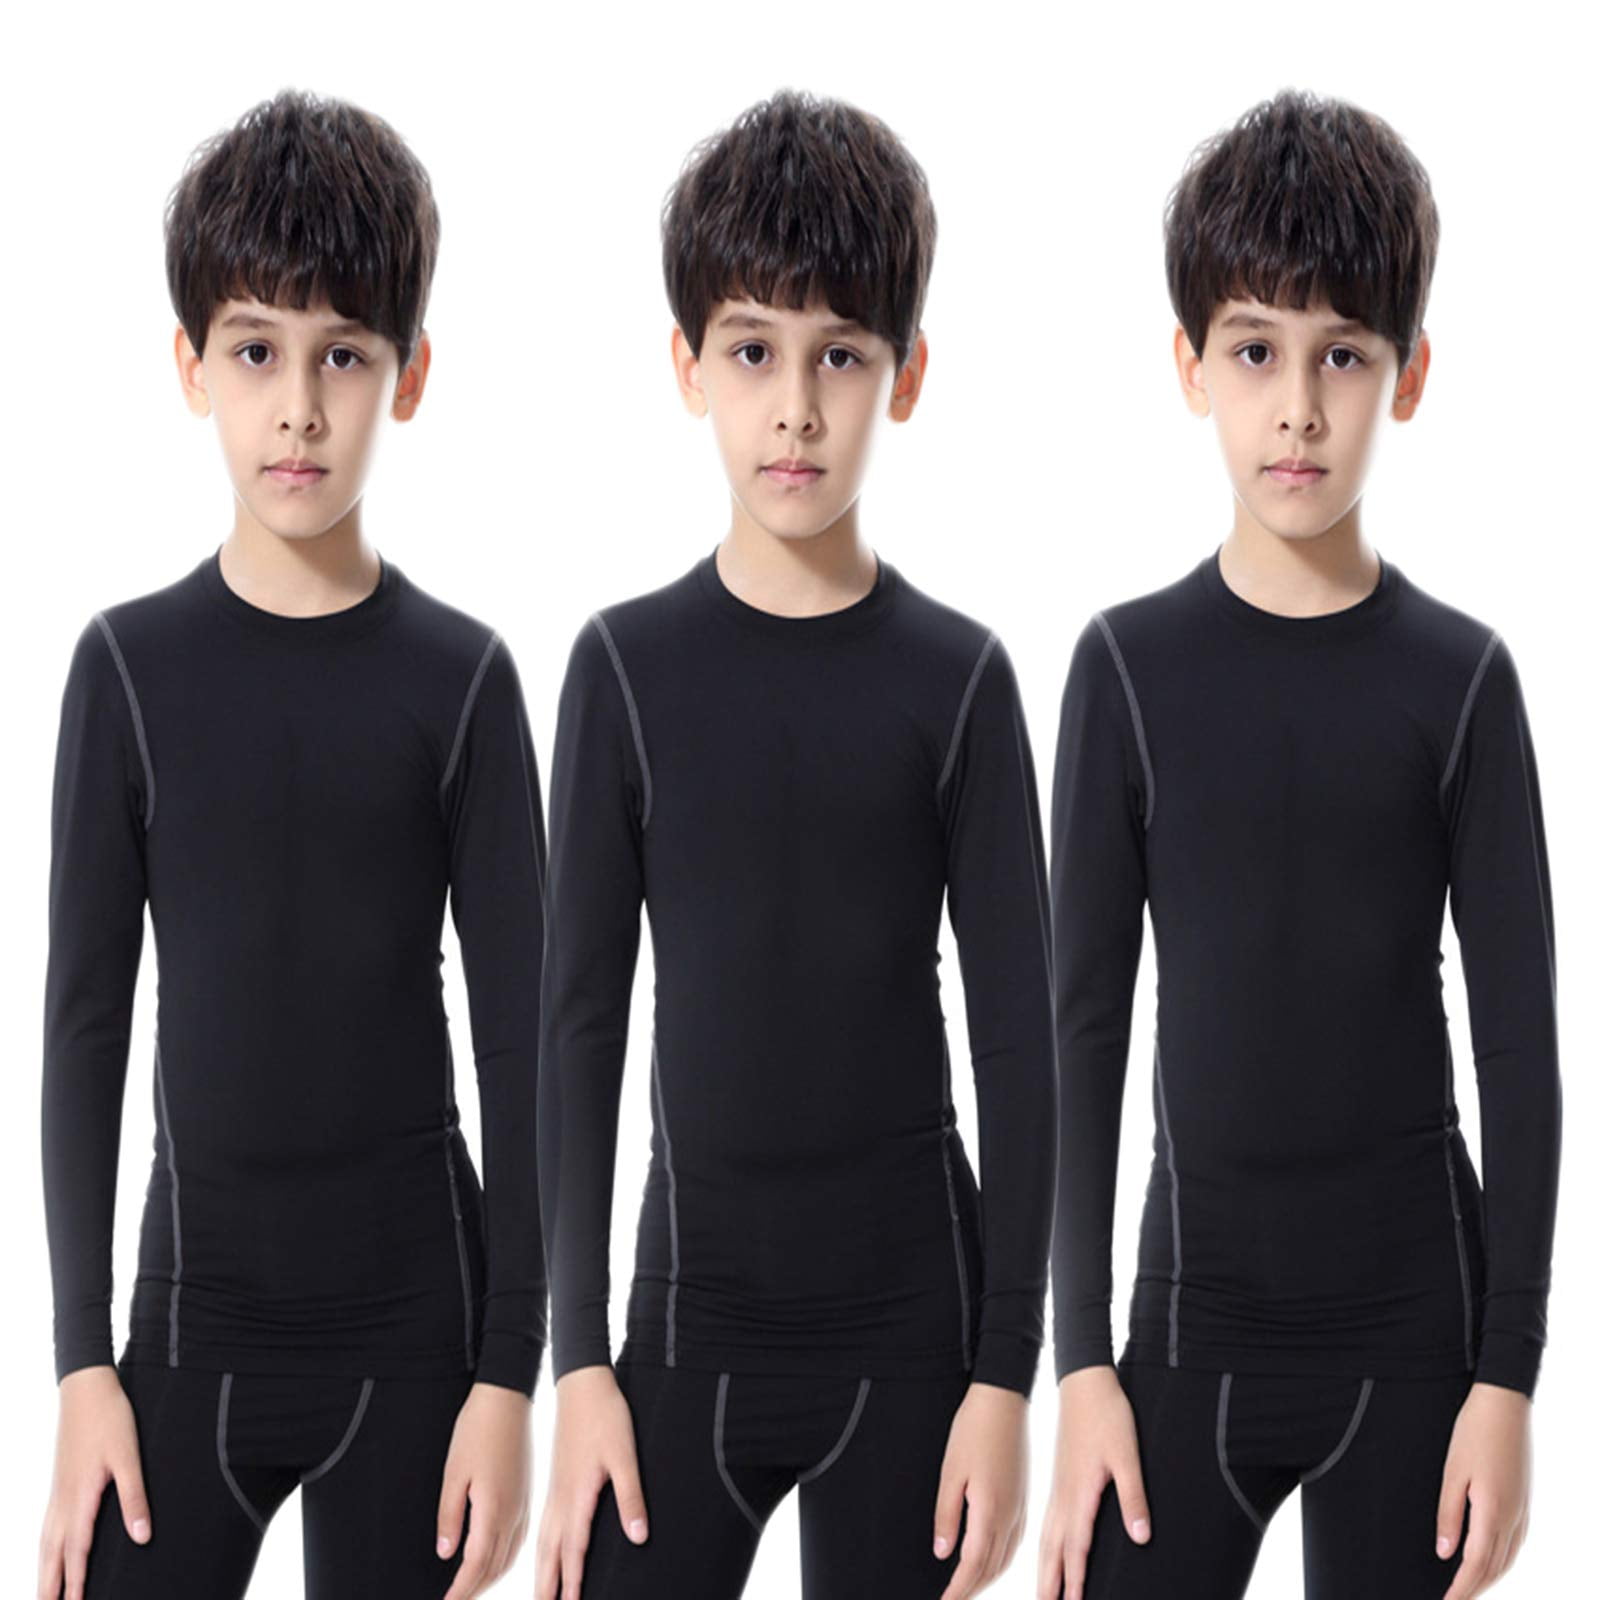 Minghe Mens Compression Shirts Short Sleeve Tops Workout Base Layer 3 Pack 